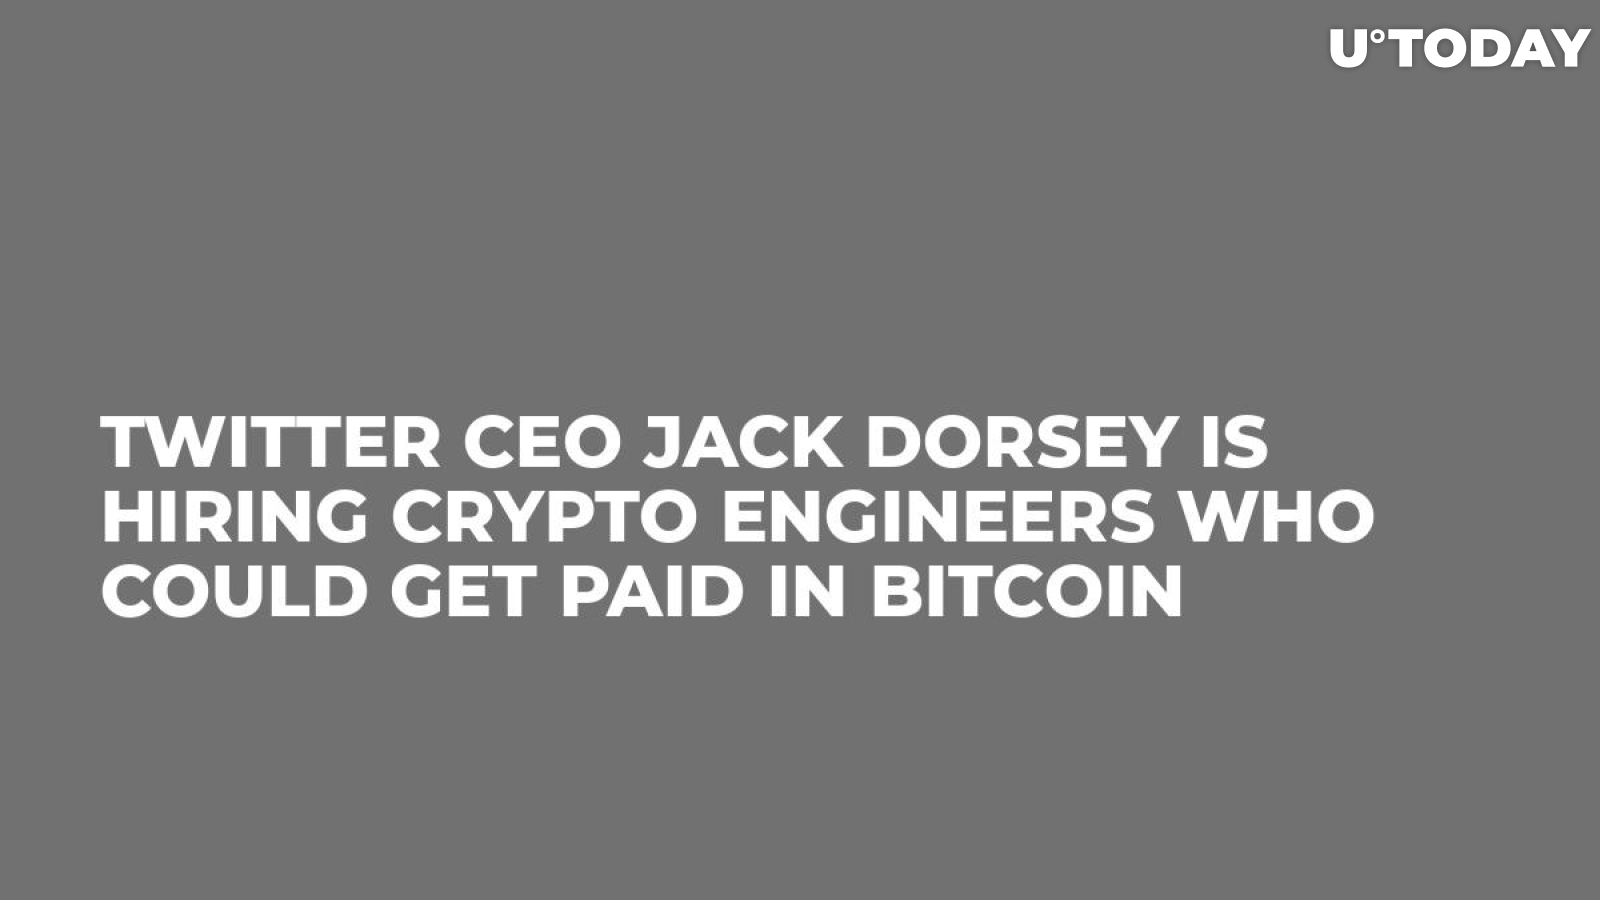 Twitter CEO Jack Dorsey Is Hiring Crypto Engineers Who Could Get Paid in Bitcoin   